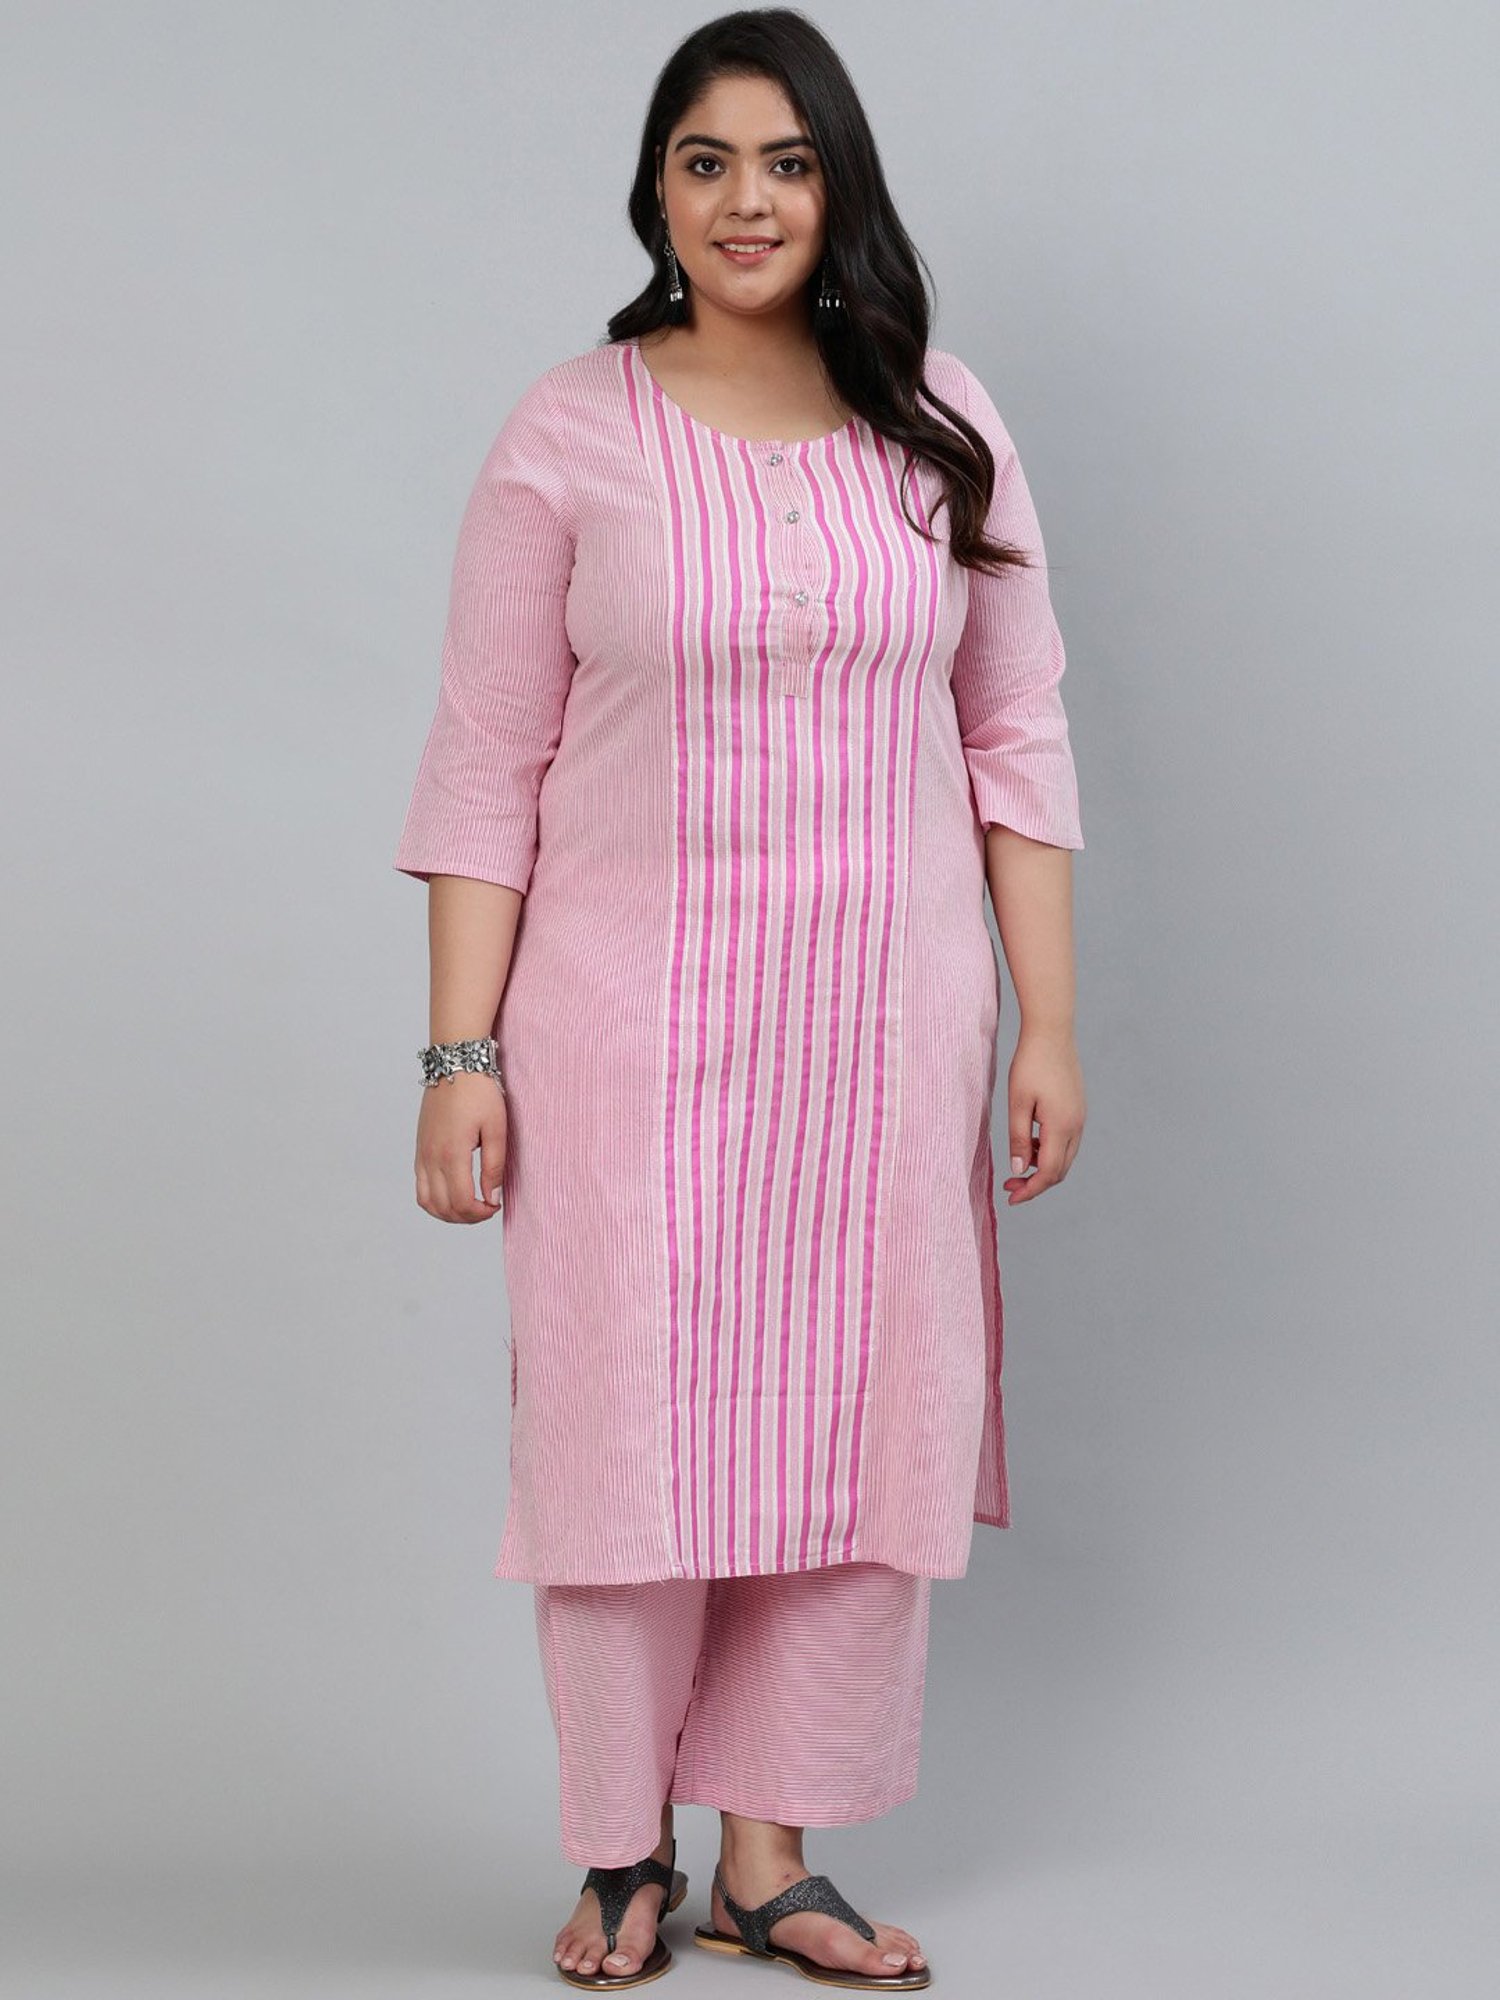 Shop Jaipore - Embroidered kurti with matching plazo and hot pink dupatta  Sizes M,L,XL,XXL | Facebook